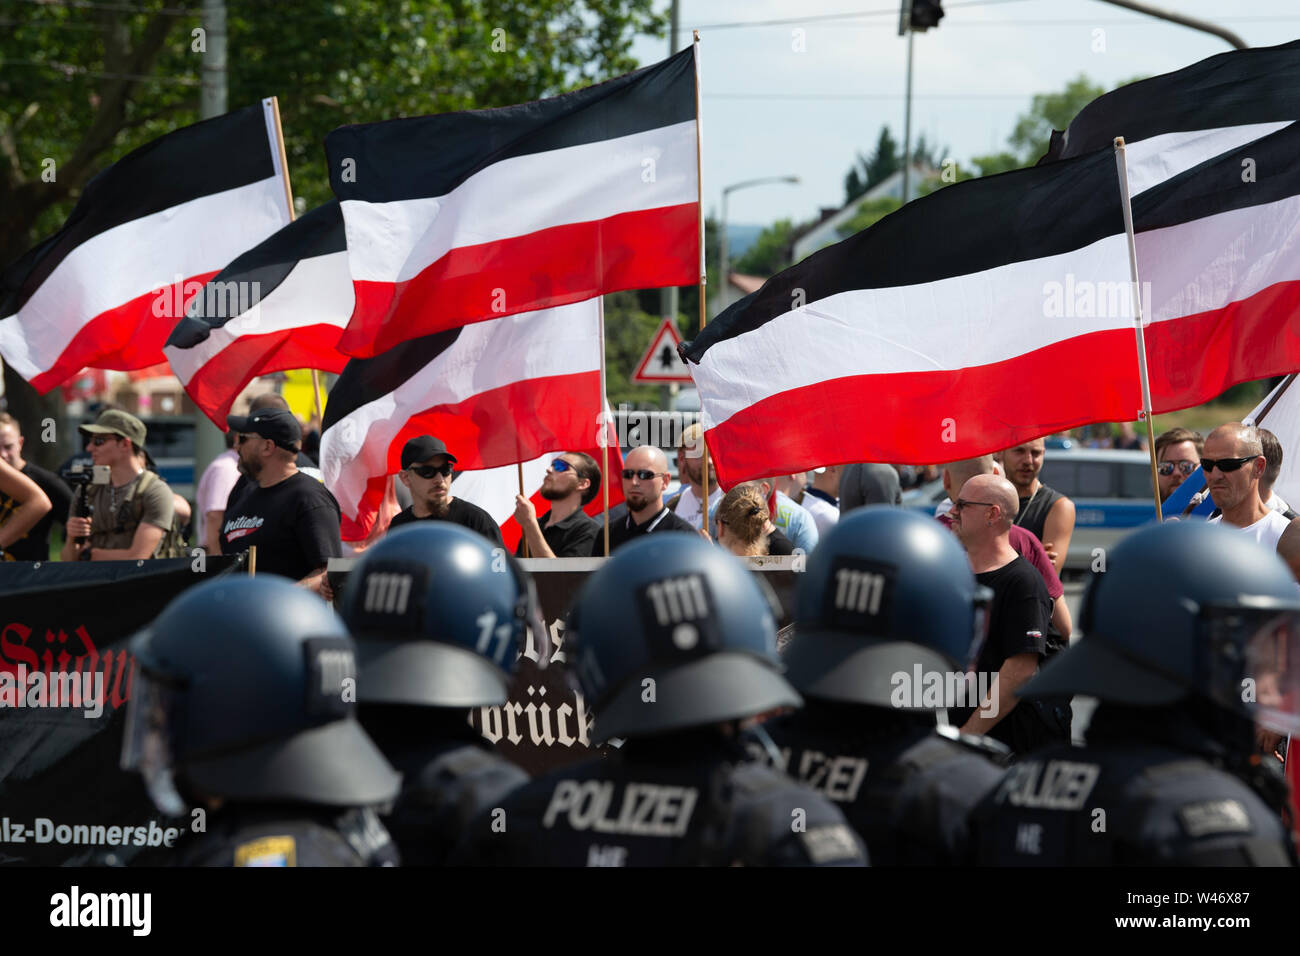 Hanover, Germany. Kassel, Germany. 20th July, 2019. Supporters of the small right-wing extremist party 'Die Rechte' (The Right) are flying their flags during the demonstration. The party had called for a demonstration in Kassel against media prejudgement in connection with the Lübcke case. A massive police presence is to prevent possible riots between the two camps. Credit: Swen Pförtner/dpa/Alamy Live News Stock Photo